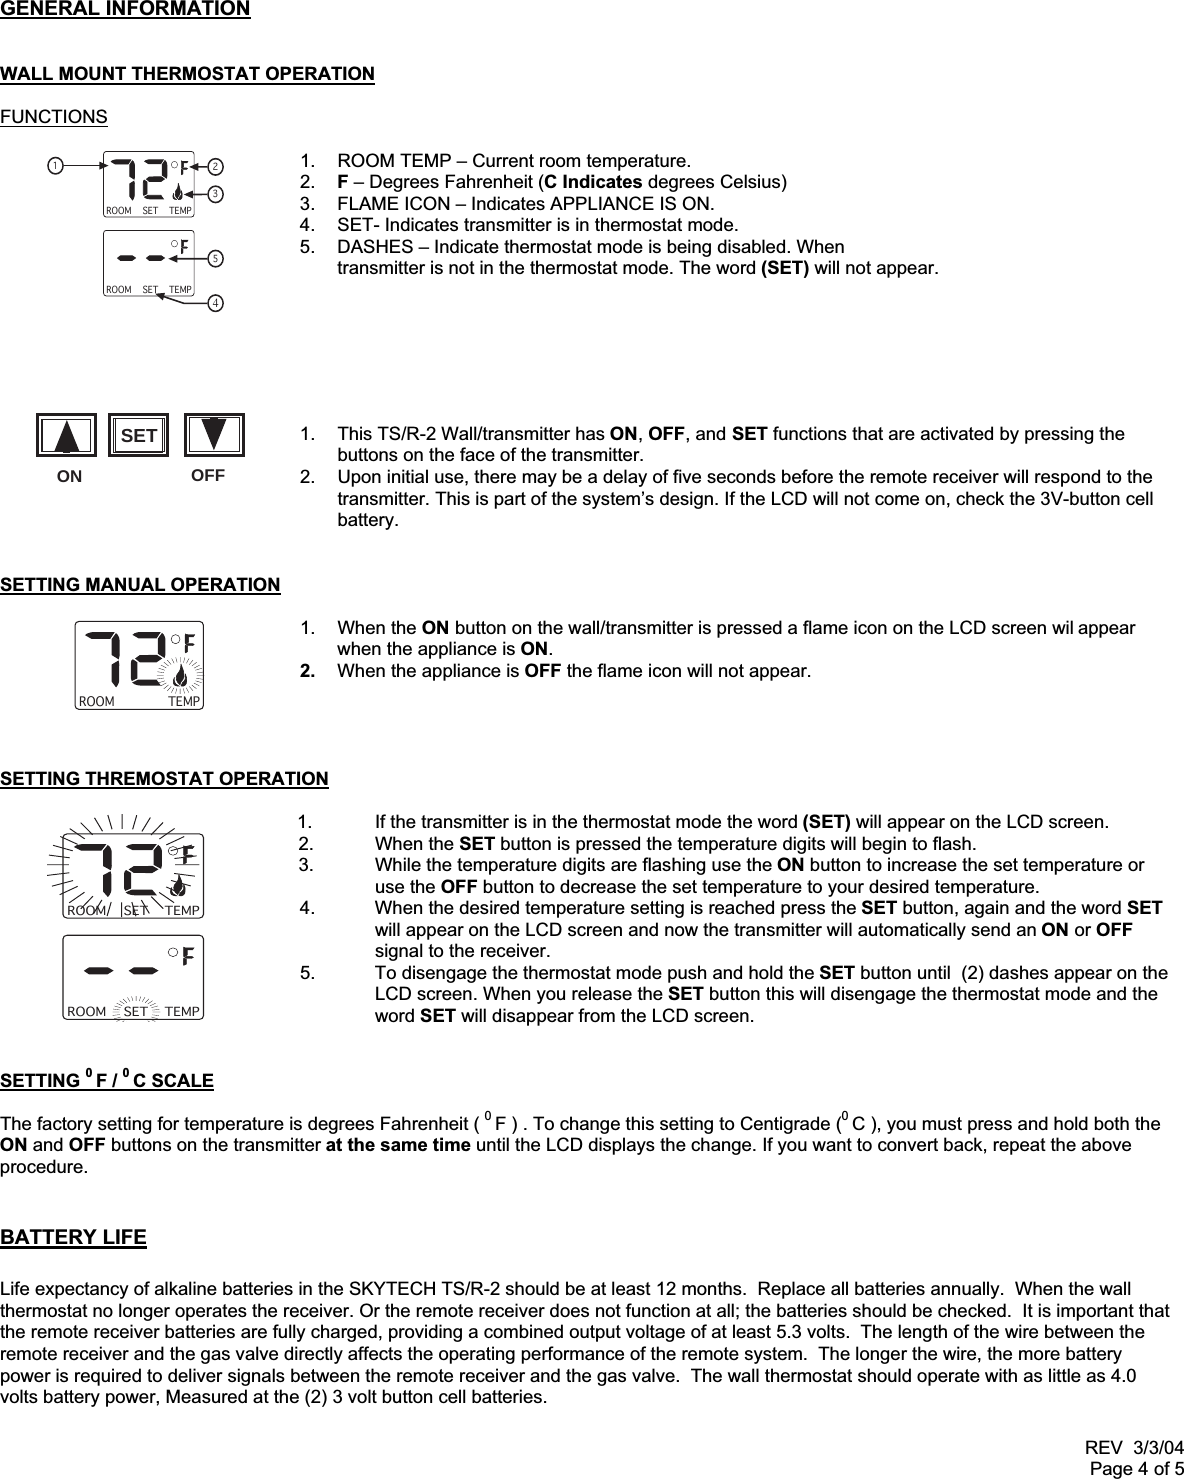 REV  3/3/04Page 4 of 5GENERAL INFORMATIONWALL MOUNT THERMOSTAT OPERATIONFUNCTIONS1.  ROOM TEMP – Current room temperature.2.  F – Degrees Fahrenheit (C Indicates degrees Celsius)3.  FLAME ICON – Indicates APPLIANCE IS ON.4.  SET- Indicates transmitter is in thermostat mode.5.  DASHES – Indicate thermostat mode is being disabled. Whentransmitter is not in the thermostat mode. The word (SET) will not appear.1.  This TS/R-2 Wall/transmitter has ON, OFF, and SET functions that are activated by pressing thebuttons on the face of the transmitter.2.  Upon initial use, there may be a delay of five seconds before the remote receiver will respond to thetransmitter. This is part of the system’s design. If the LCD will not come on, check the 3V-button cellbattery.SETTING MANUAL OPERATION1. When the ON button on the wall/transmitter is pressed a flame icon on the LCD screen wil appearwhen the appliance is ON.2.  When the appliance is OFF the flame icon will not appear.SETTING THREMOSTAT OPERATION              1. If the transmitter is in the thermostat mode the word (SET) will appear on the LCD screen.       2. When the SET button is pressed the temperature digits will begin to flash.       3. While the temperature digits are flashing use the ON button to increase the set temperature or                    use the OFF button to decrease the set temperature to your desired temperature.4. When the desired temperature setting is reached press the SET button, again and the word SETwill appear on the LCD screen and now the transmitter will automatically send an ON or OFFsignal to the receiver.5. To disengage the thermostat mode push and hold the SET button until  (2) dashes appear on theLCD screen. When you release the SET button this will disengage the thermostat mode and theword SET will disappear from the LCD screen.SETTING 0 F / 0 C SCALEThe factory setting for temperature is degrees Fahrenheit ( 0 F ) . To change this setting to Centigrade (0 C ), you must press and hold both theON and OFF buttons on the transmitter at the same time until the LCD displays the change. If you want to convert back, repeat the aboveprocedure.BATTERY LIFELife expectancy of alkaline batteries in the SKYTECH TS/R-2 should be at least 12 months.  Replace all batteries annually.  When the wallthermostat no longer operates the receiver. Or the remote receiver does not function at all; the batteries should be checked.  It is important thatthe remote receiver batteries are fully charged, providing a combined output voltage of at least 5.3 volts.  The length of the wire between theremote receiver and the gas valve directly affects the operating performance of the remote system.  The longer the wire, the more batterypower is required to deliver signals between the remote receiver and the gas valve.  The wall thermostat should operate with as little as 4.0volts battery power, Measured at the (2) 3 volt button cell batteries.ROOM TEMP123SETROOM TEMPSET54ROOM TEMPROOM TEMPSETROOM TEMPSETONSETOFF